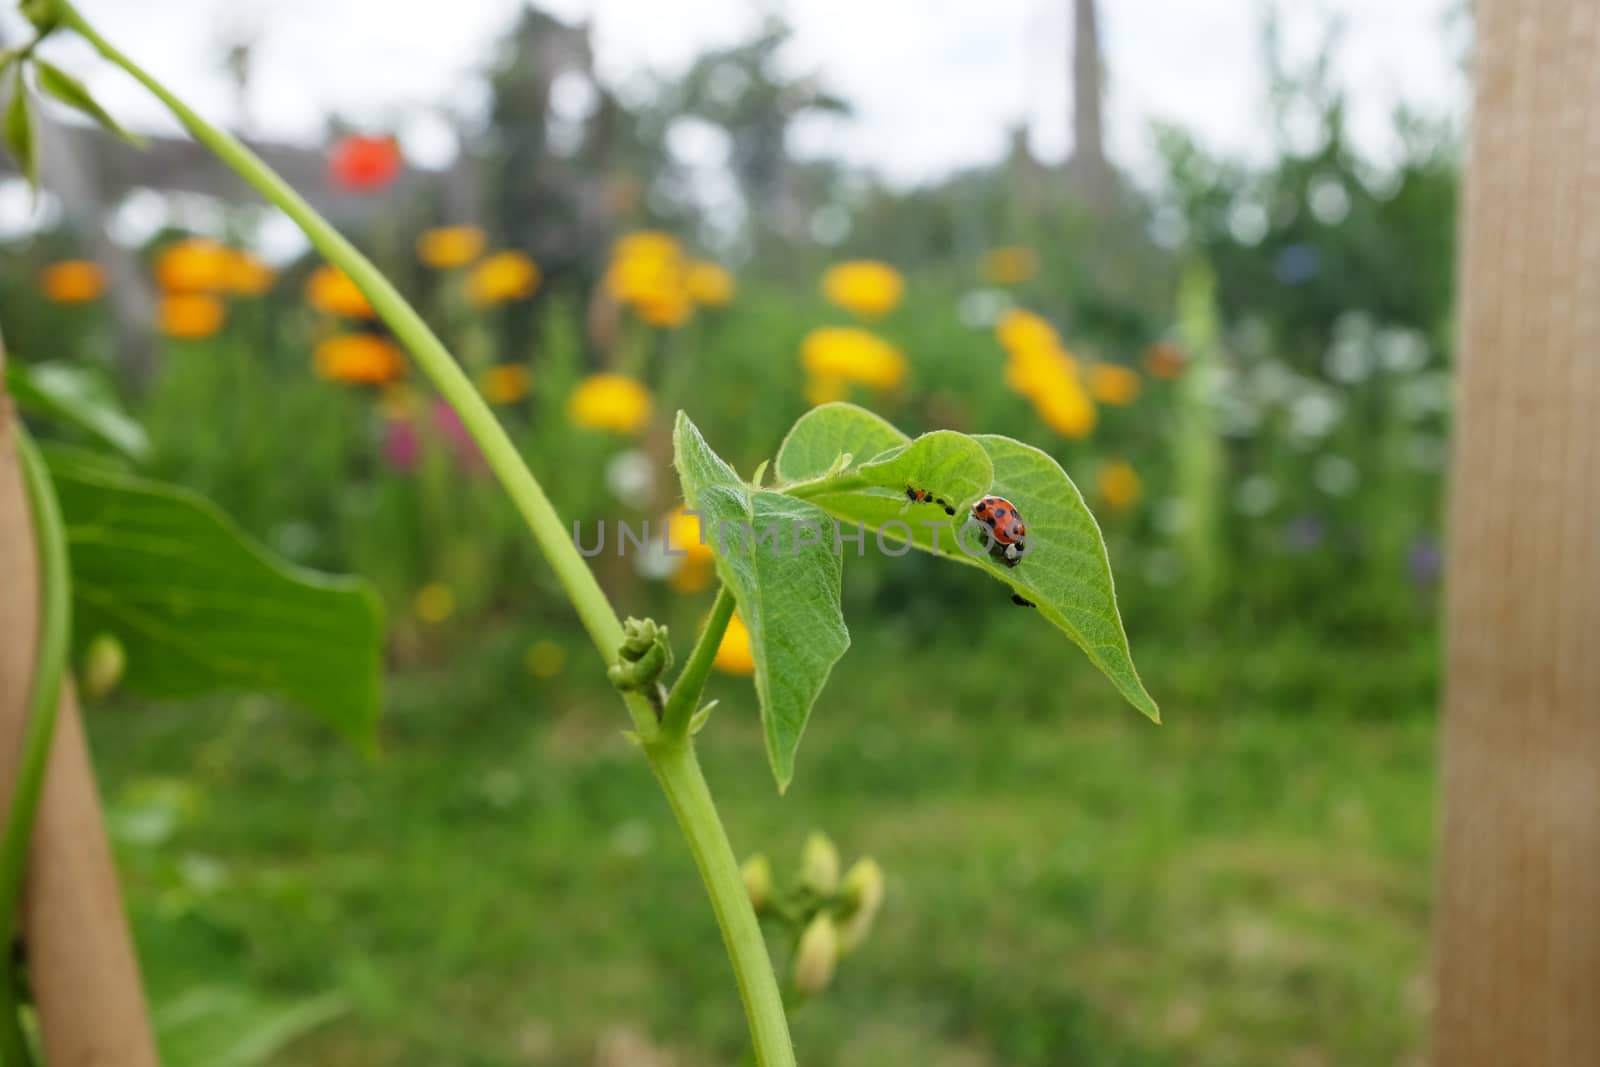 Harlequin ladybird on a runner bean leaf infested with blackfly  by sarahdoow